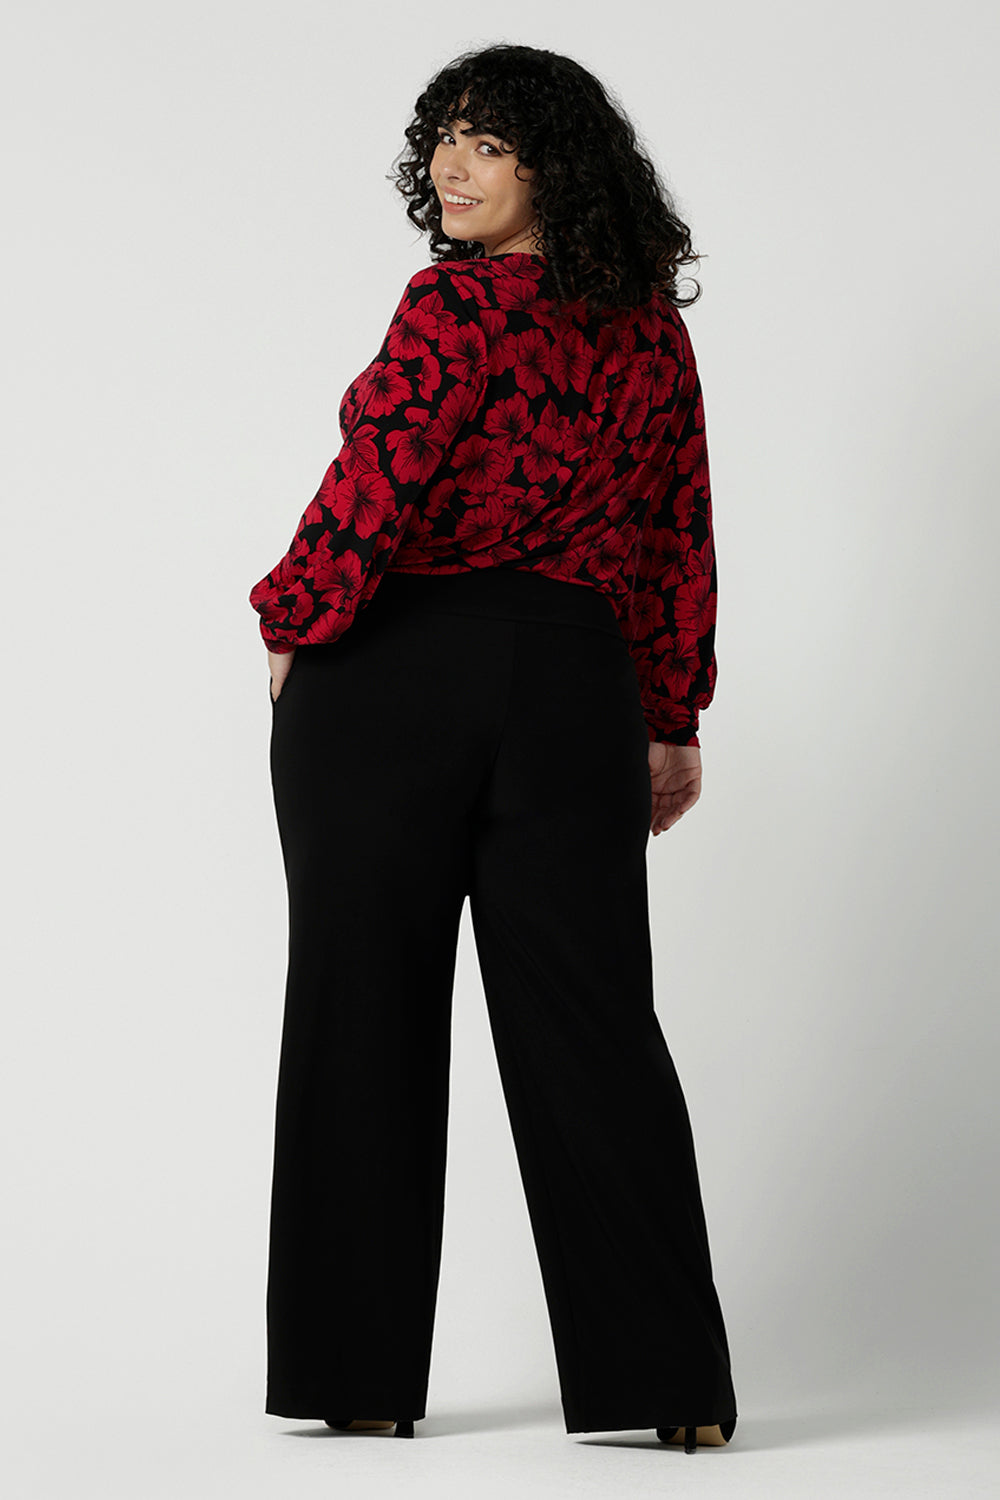 Back view of a size 18 woman wearing the scoop neck bold poppy top with balloon sleeves. Curved hemline and cuffed sleeves. Made in Australia for women size 8 - 24. Styled back with the Monroe pant in black, a straight leg comfortable corporate work pant.